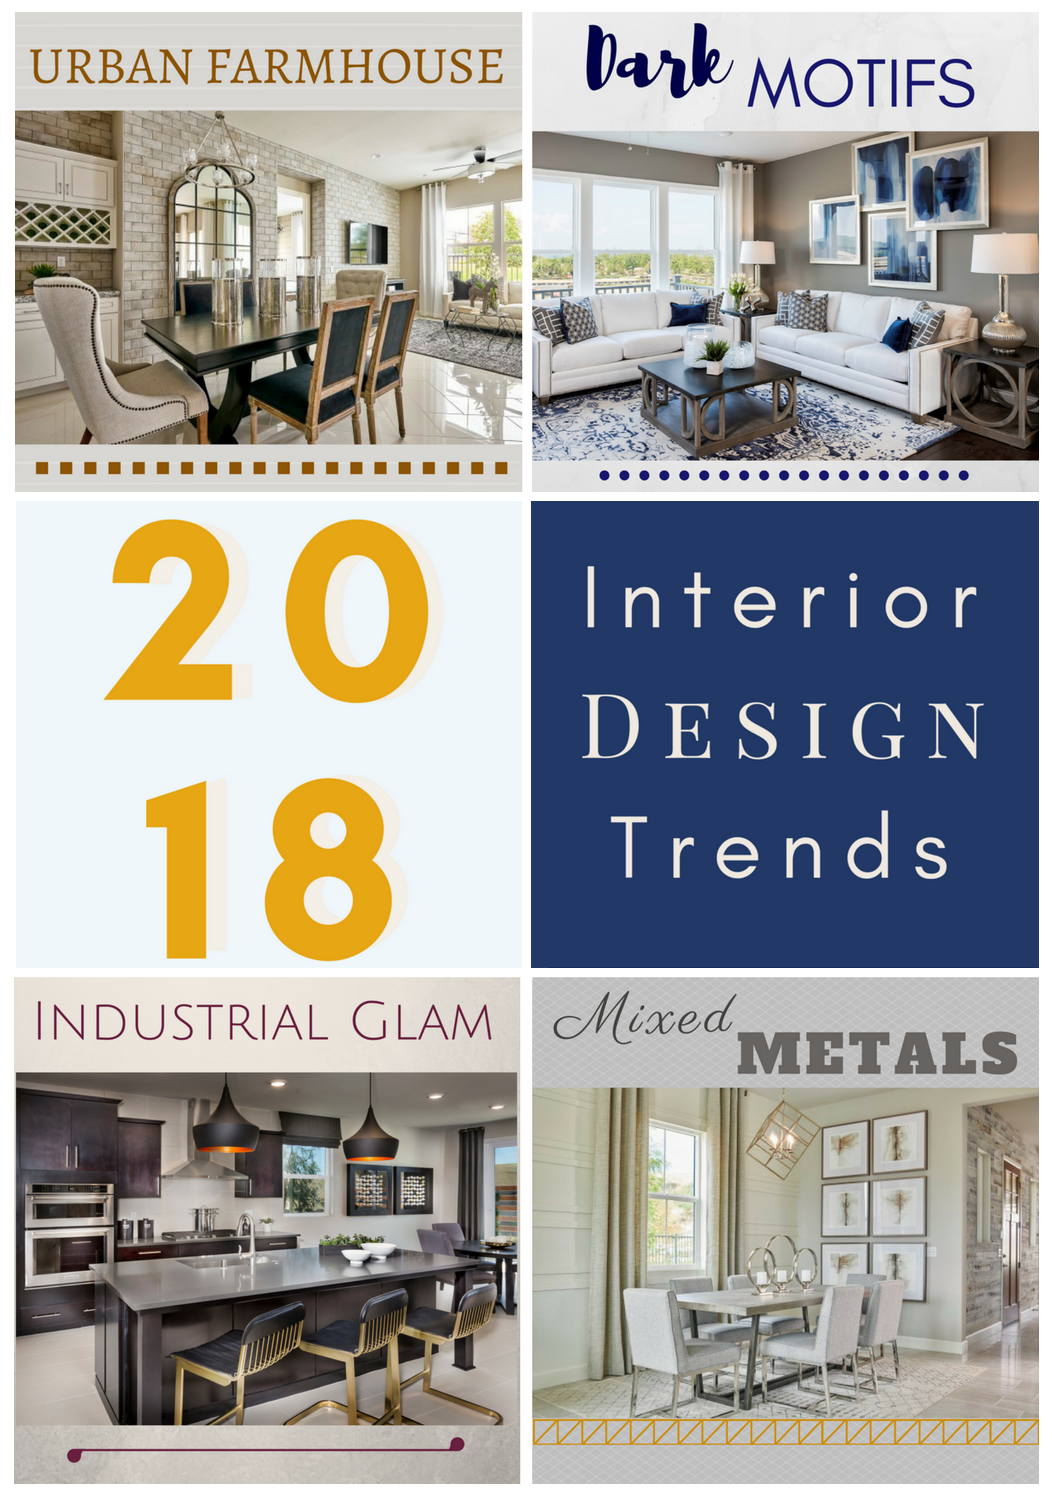 Pulte Homes Provides Its Top Interior Design Trends For 2018